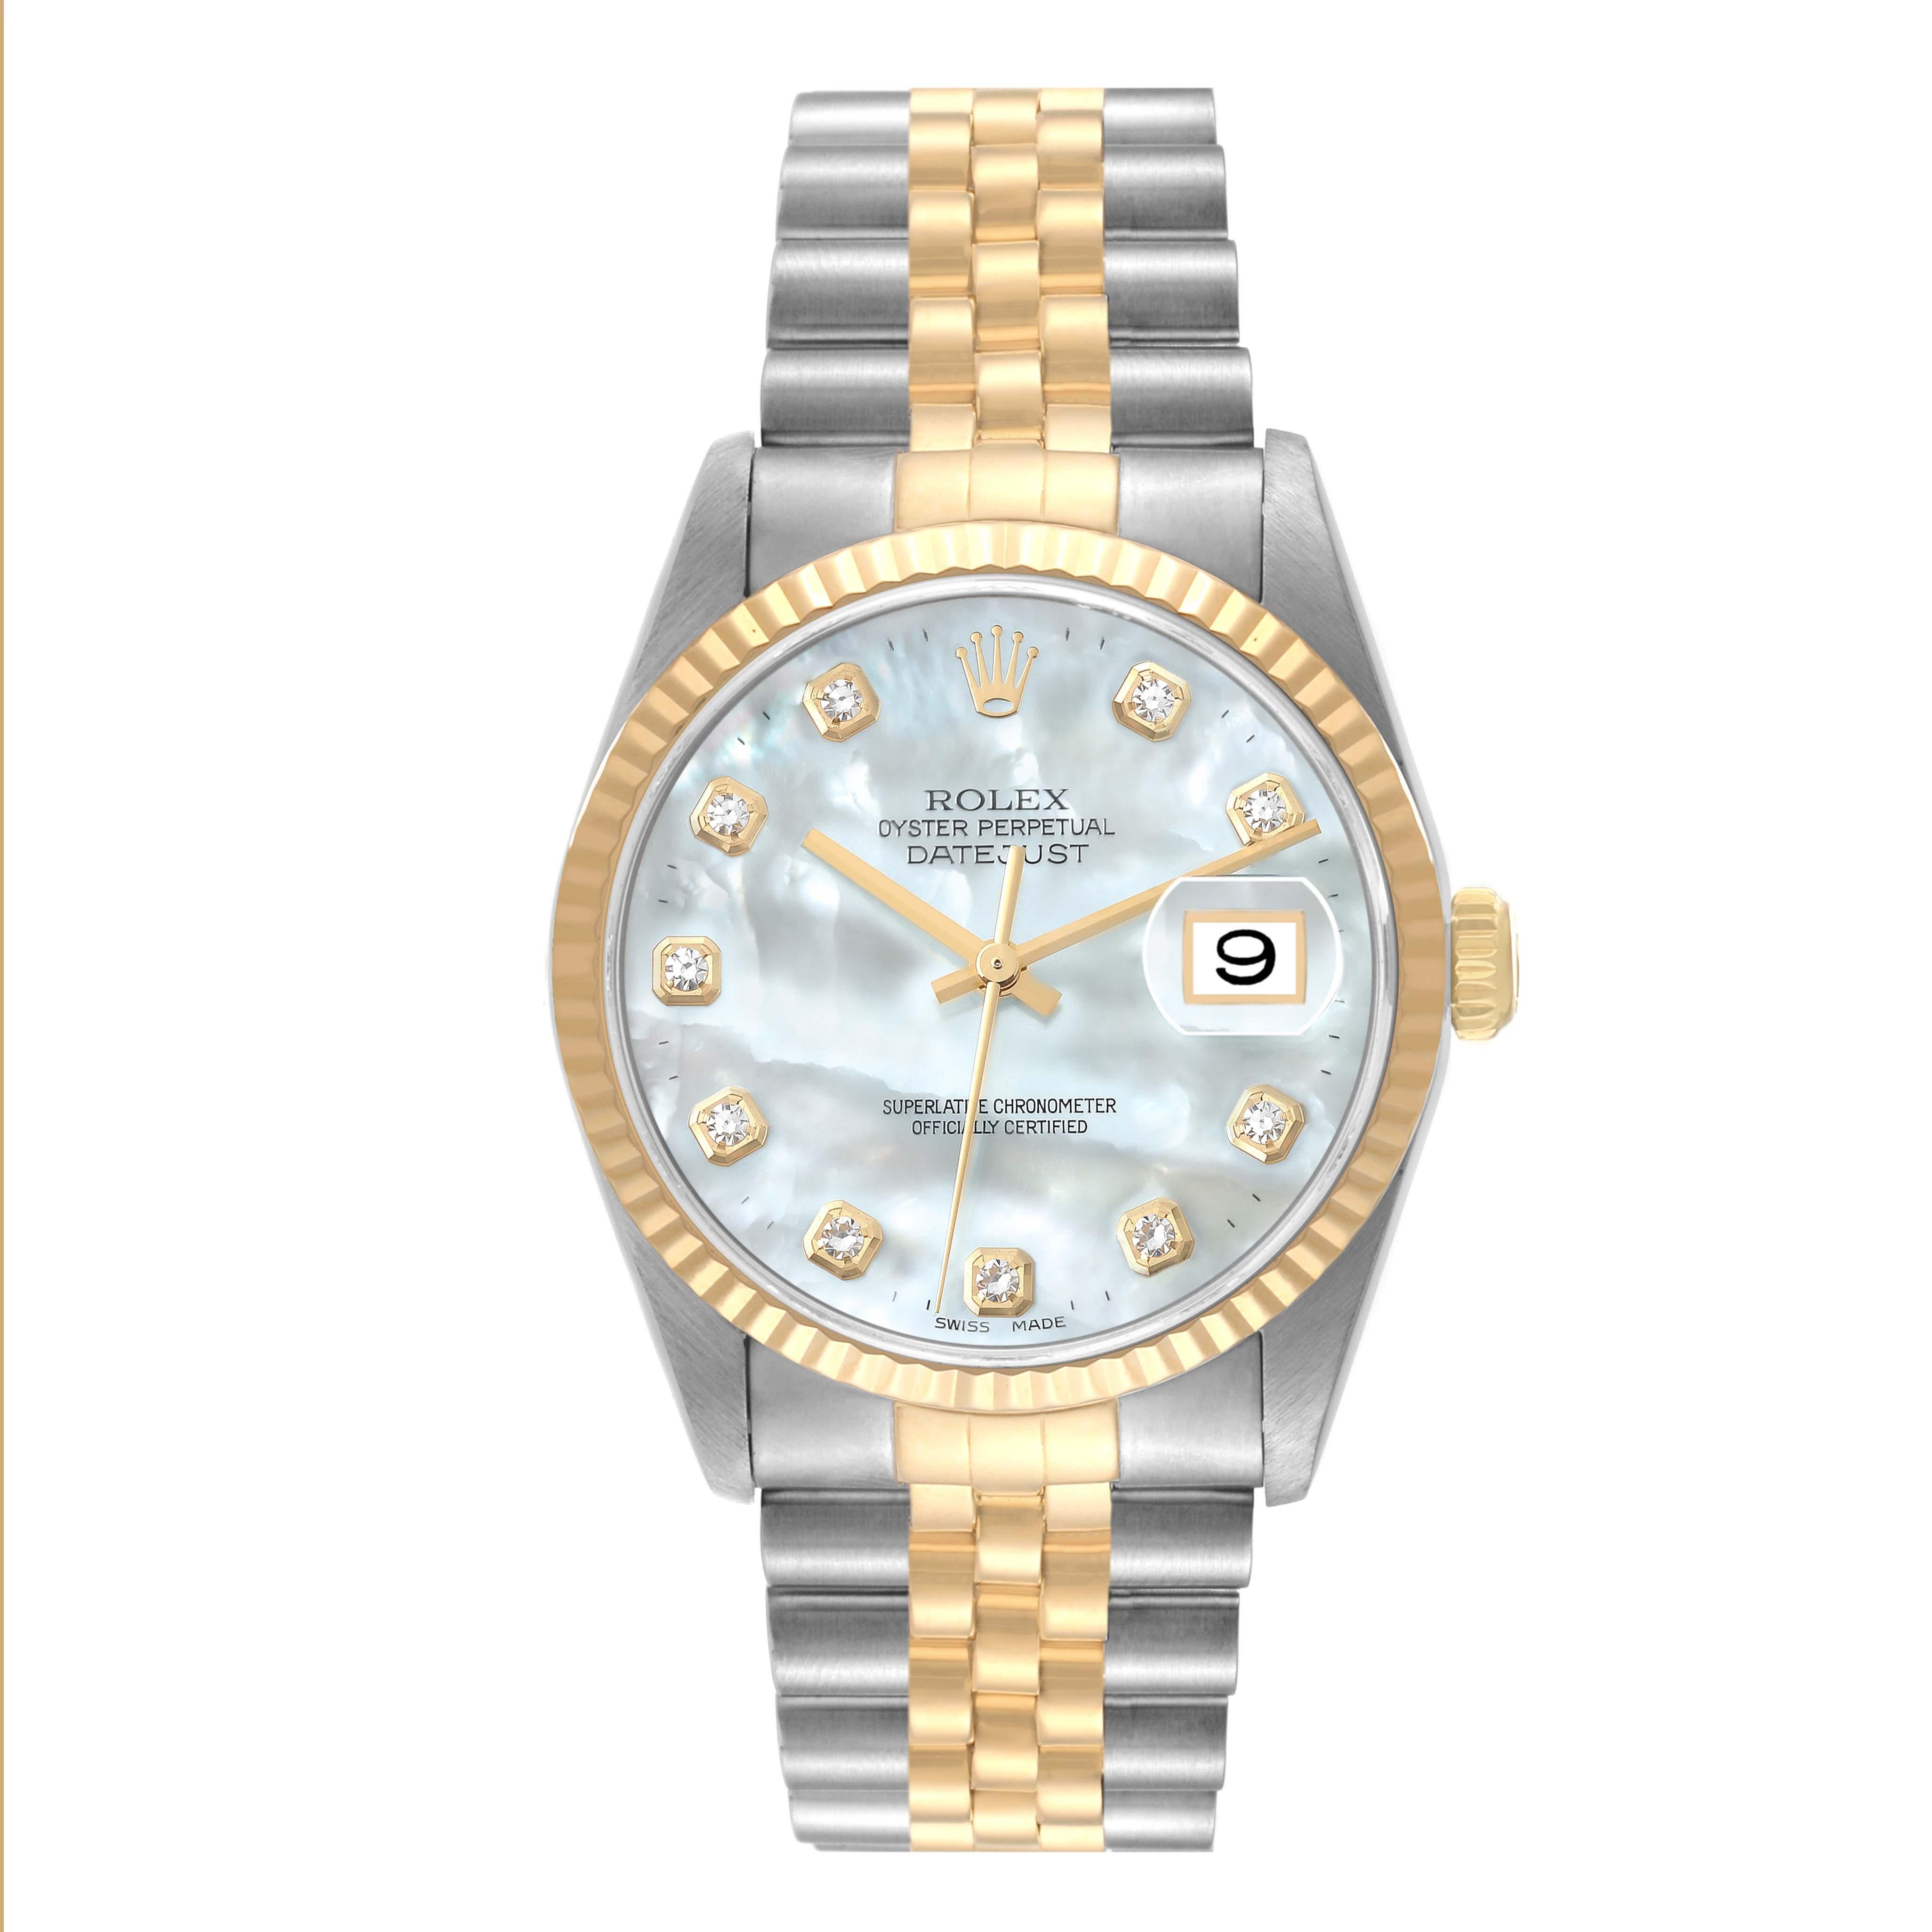 NOT FOR SALE Rolex Datejust Steel Yellow Gold Mother of Pearl Diamond Dial Mens Watch 16233 PARTIAL PAYMENT. Officially certified chronometer automatic self-winding movement. Stainless steel case 36 mm in diameter.  Rolex logo on an 18K yellow gold